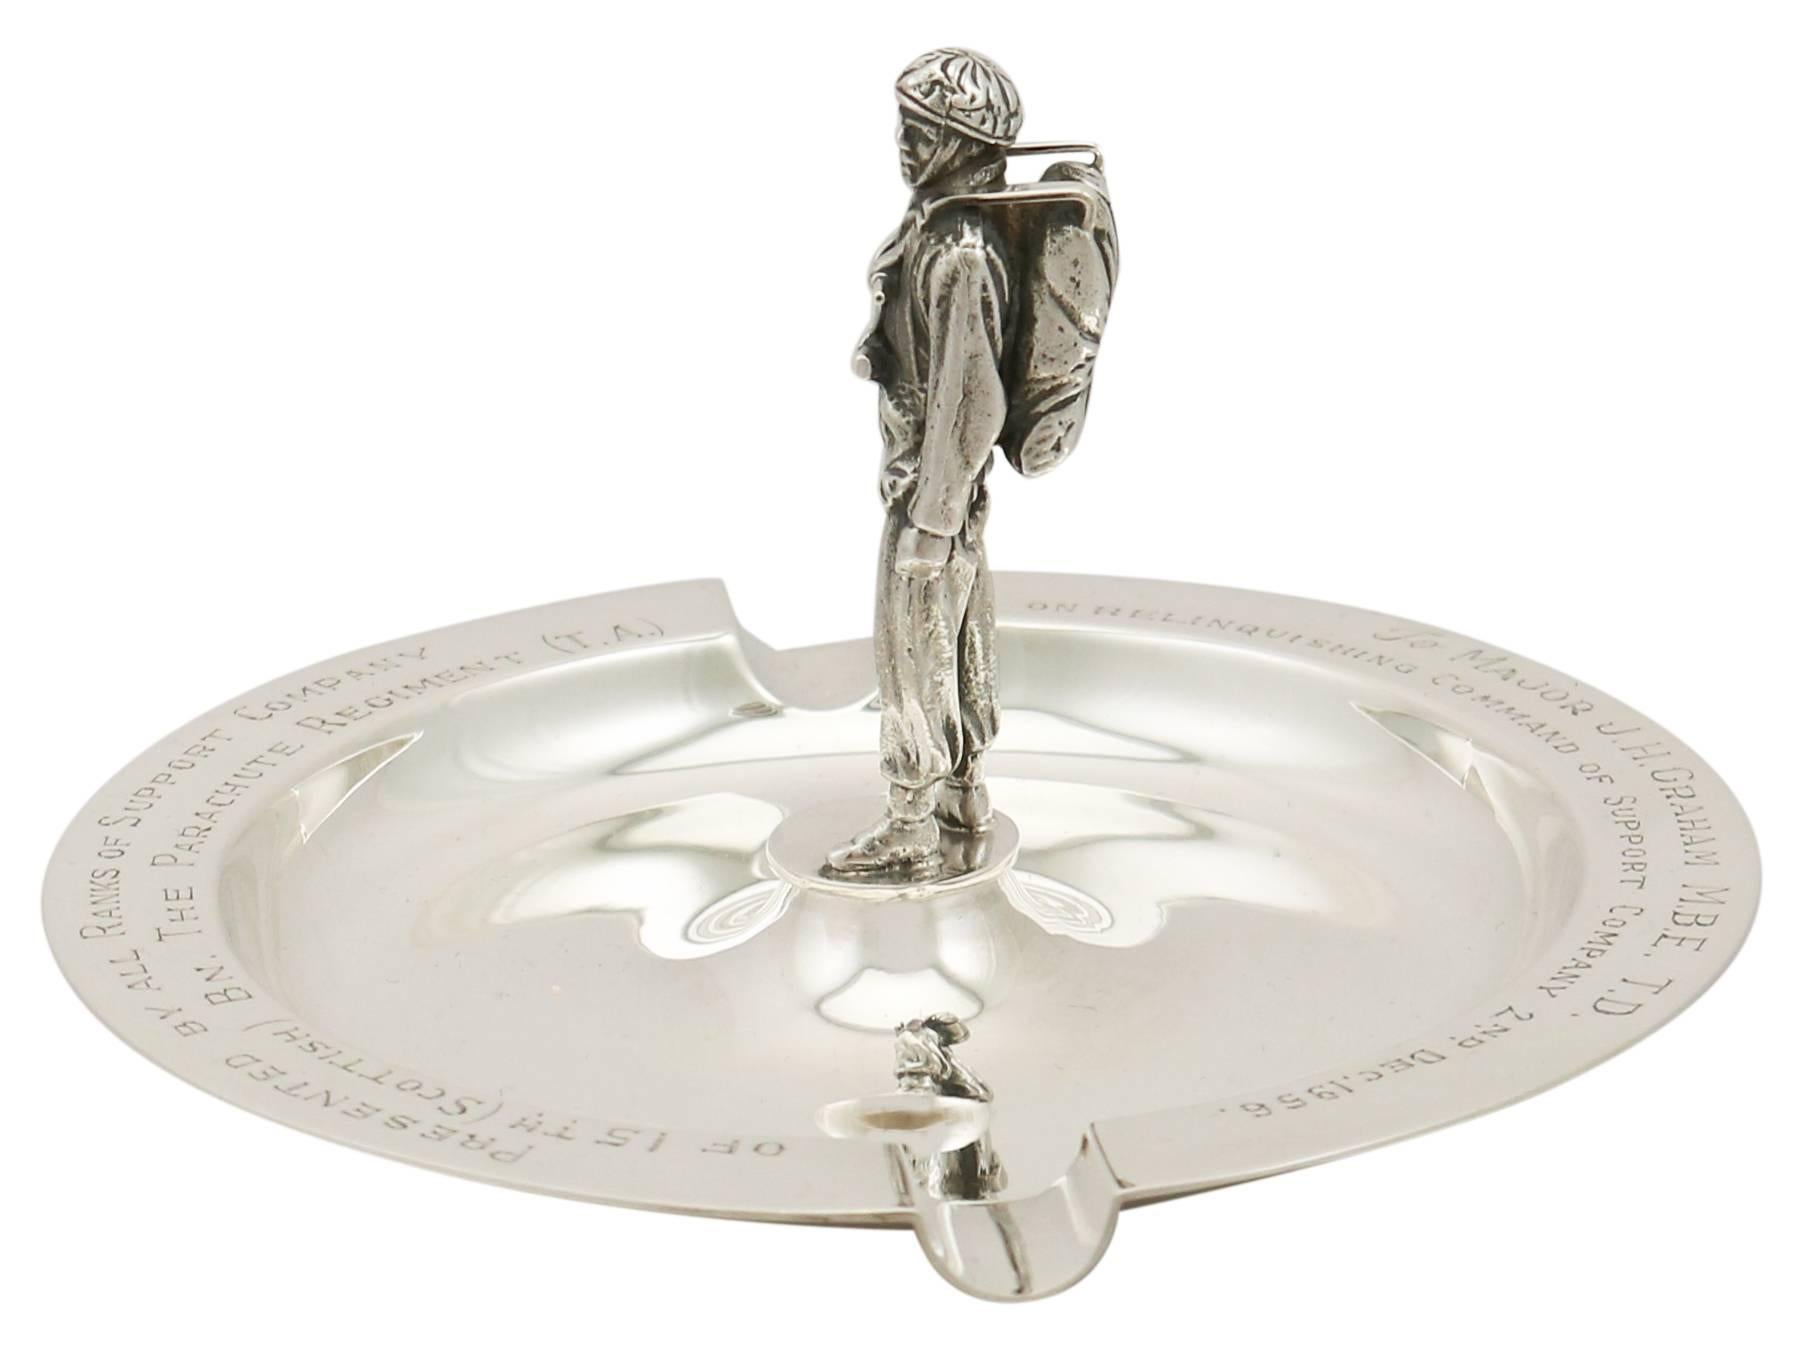 An exceptional, fine and impressive vintage Elizabeth II English sterling silver ashtray made by Garrard & Co Ltd; an addition to our military related silverware collection.

This exceptional vintage Elizabeth II sterling silver ashtray has a